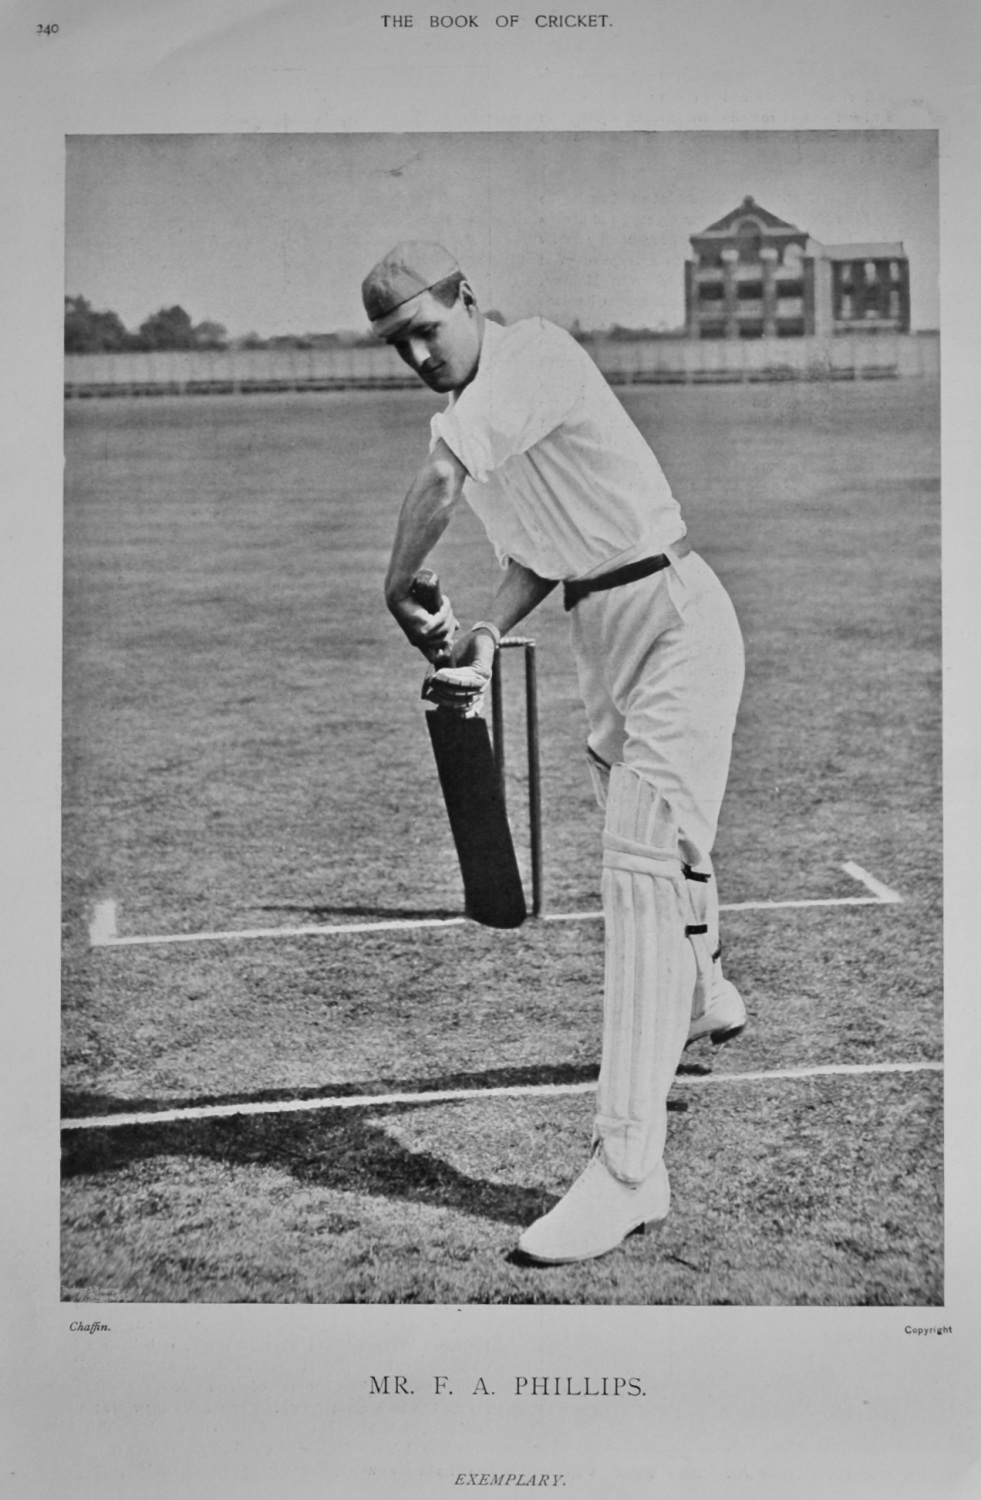 Francis Ashley Phillips.  1899.  (Cricketer)